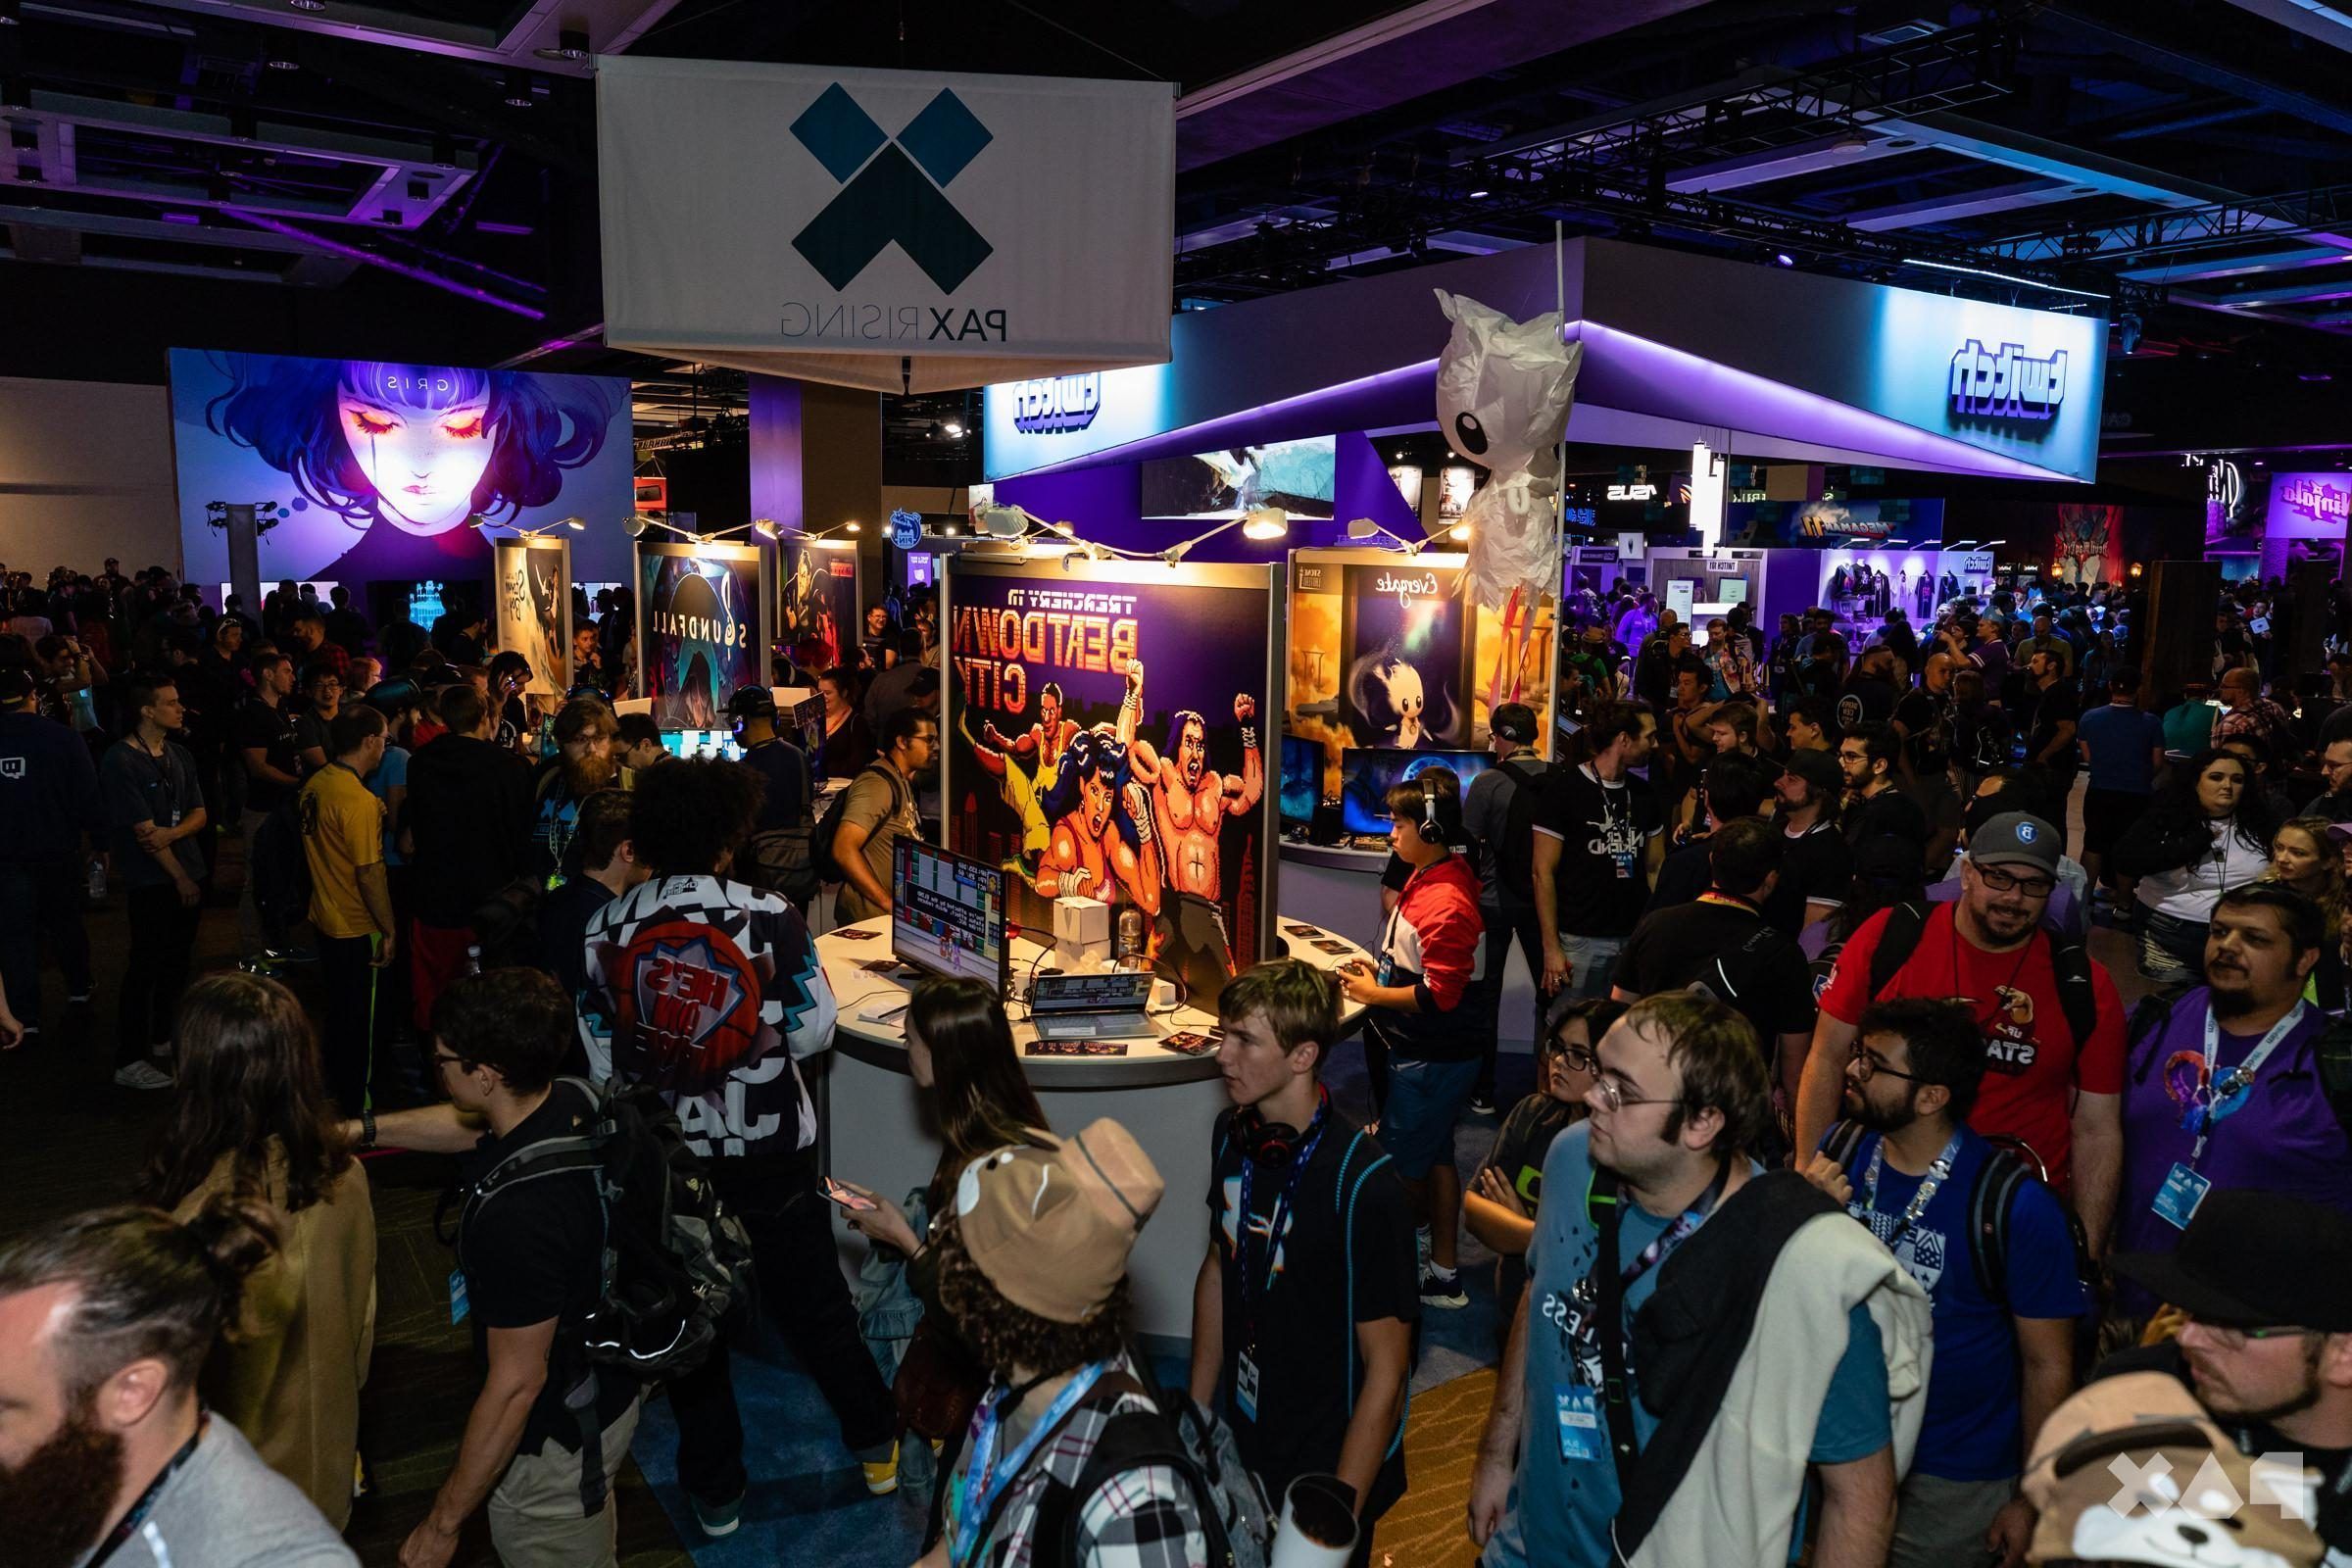 PAX West Swag Scene Includes Free Games Special Edition Pins And Hardware Giveaways